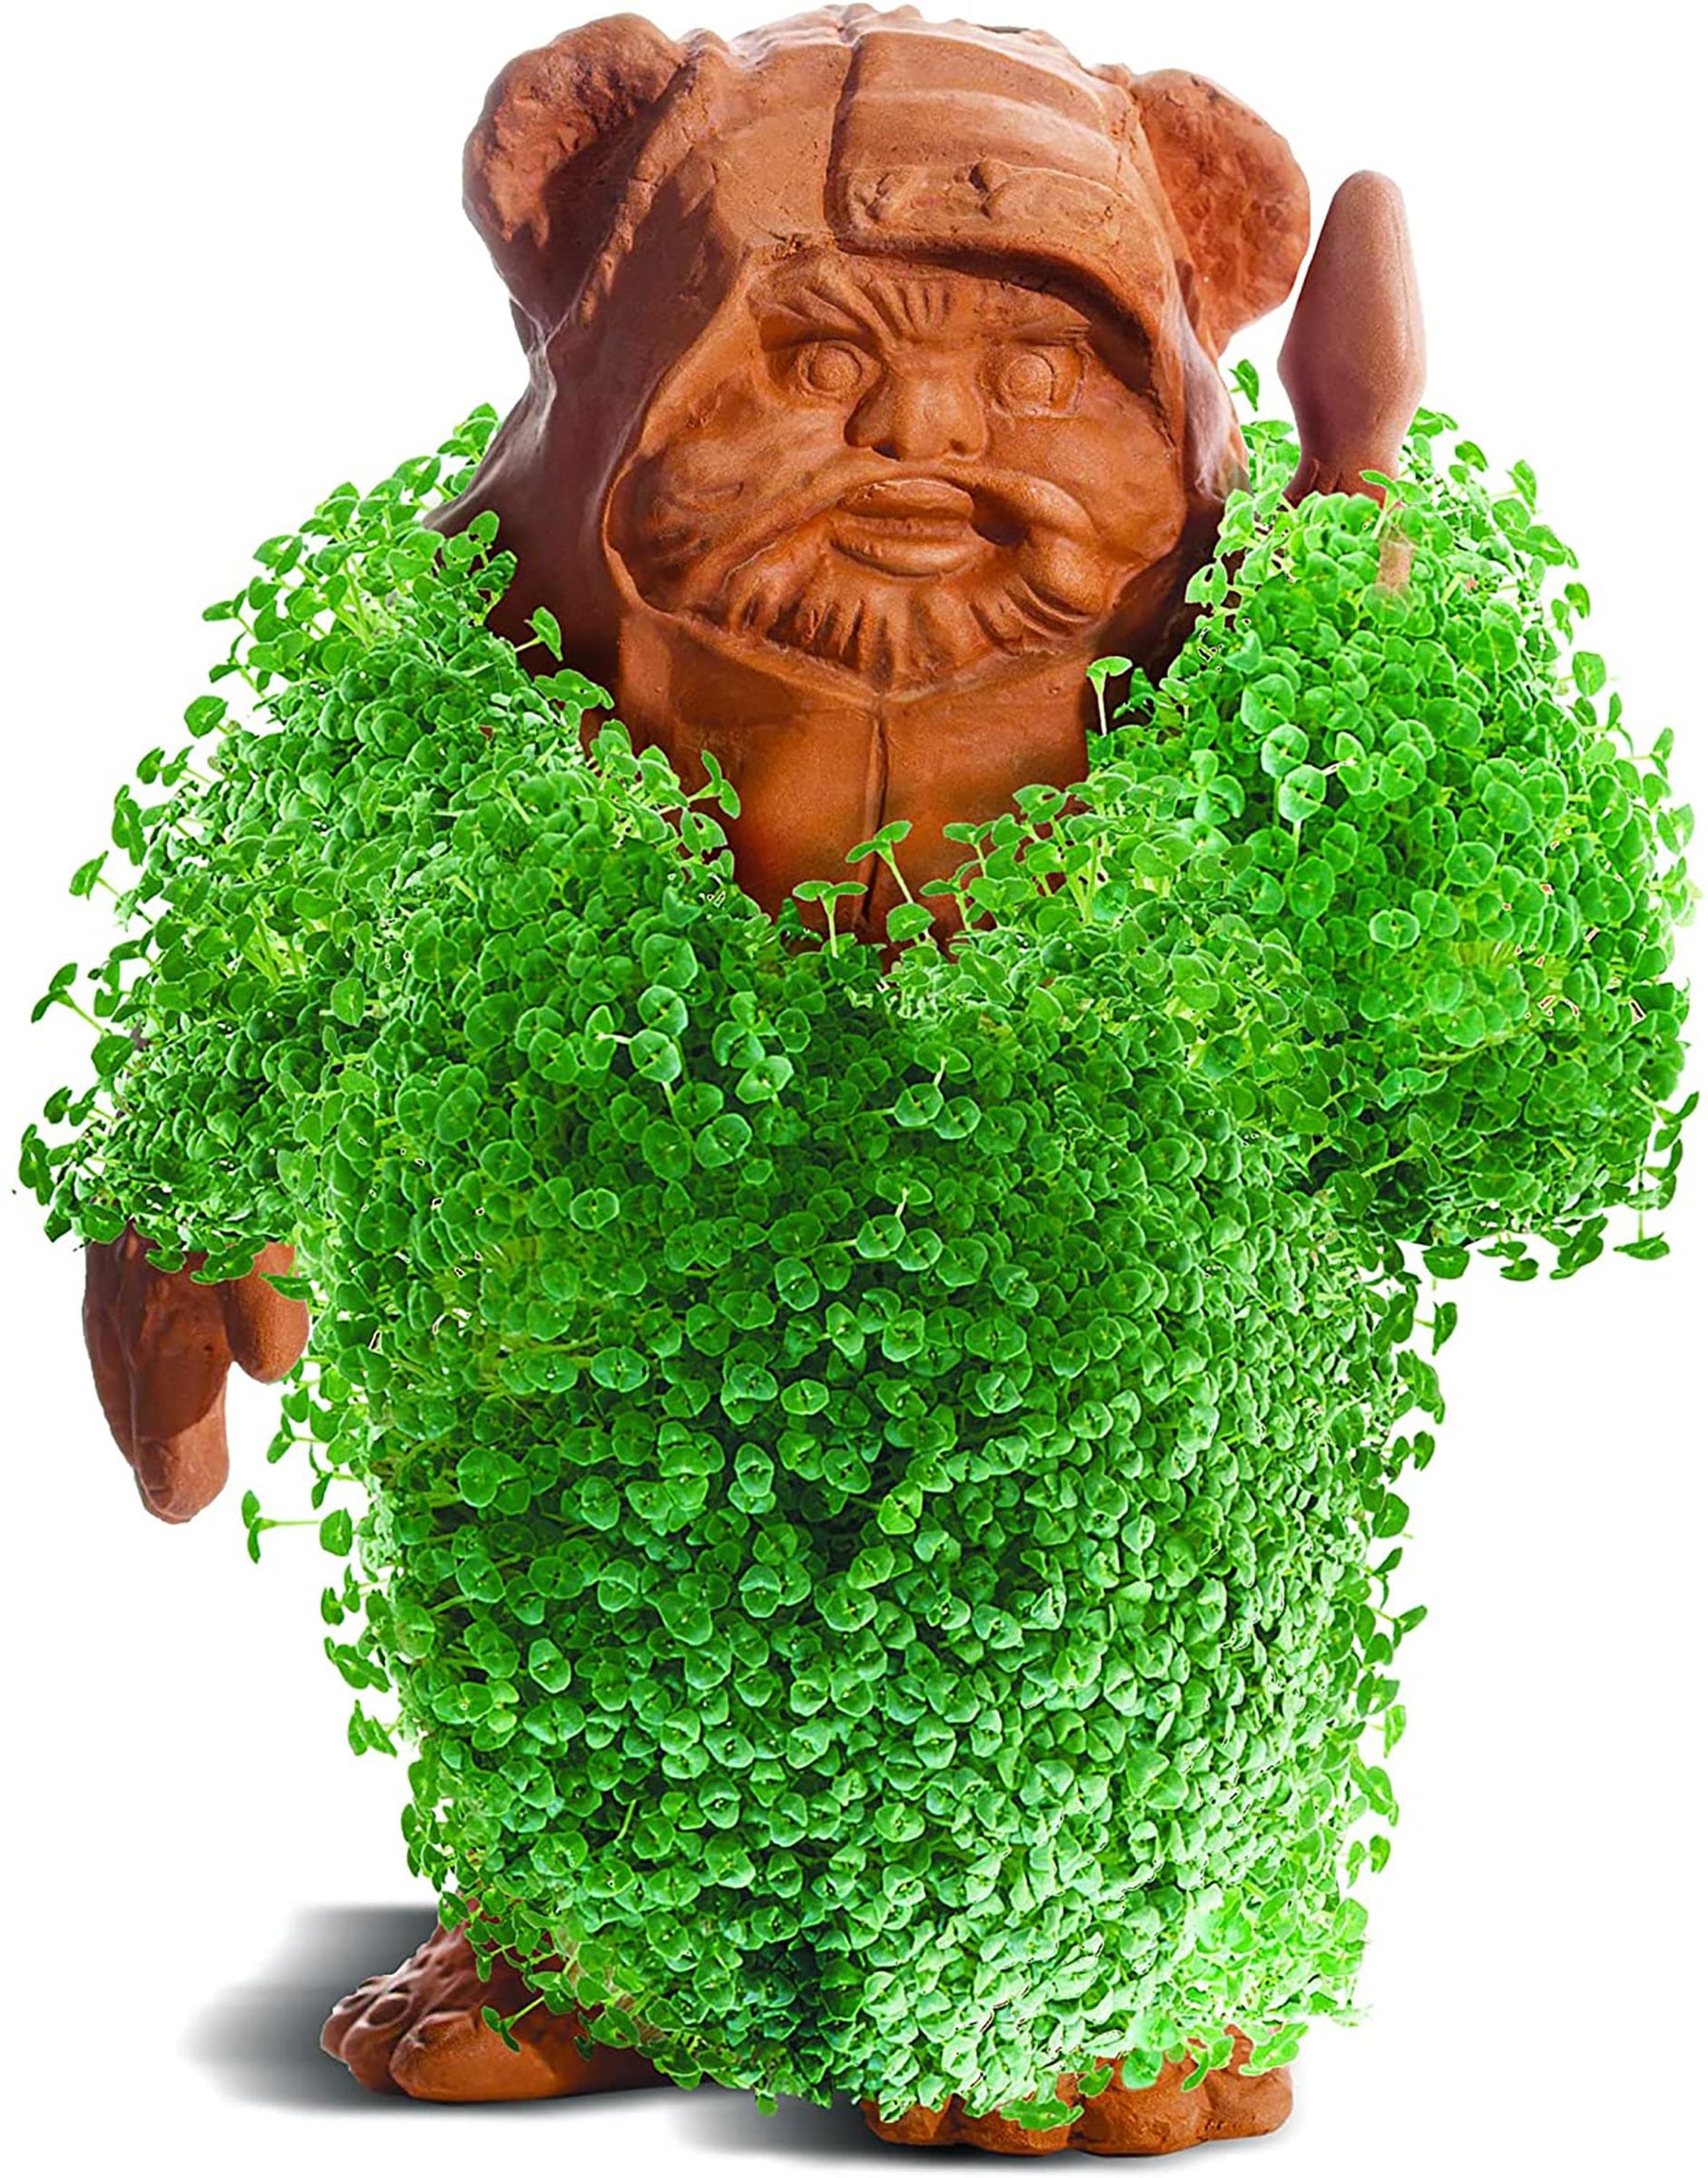 Star Wars - The Child Using The Force Chia Pet